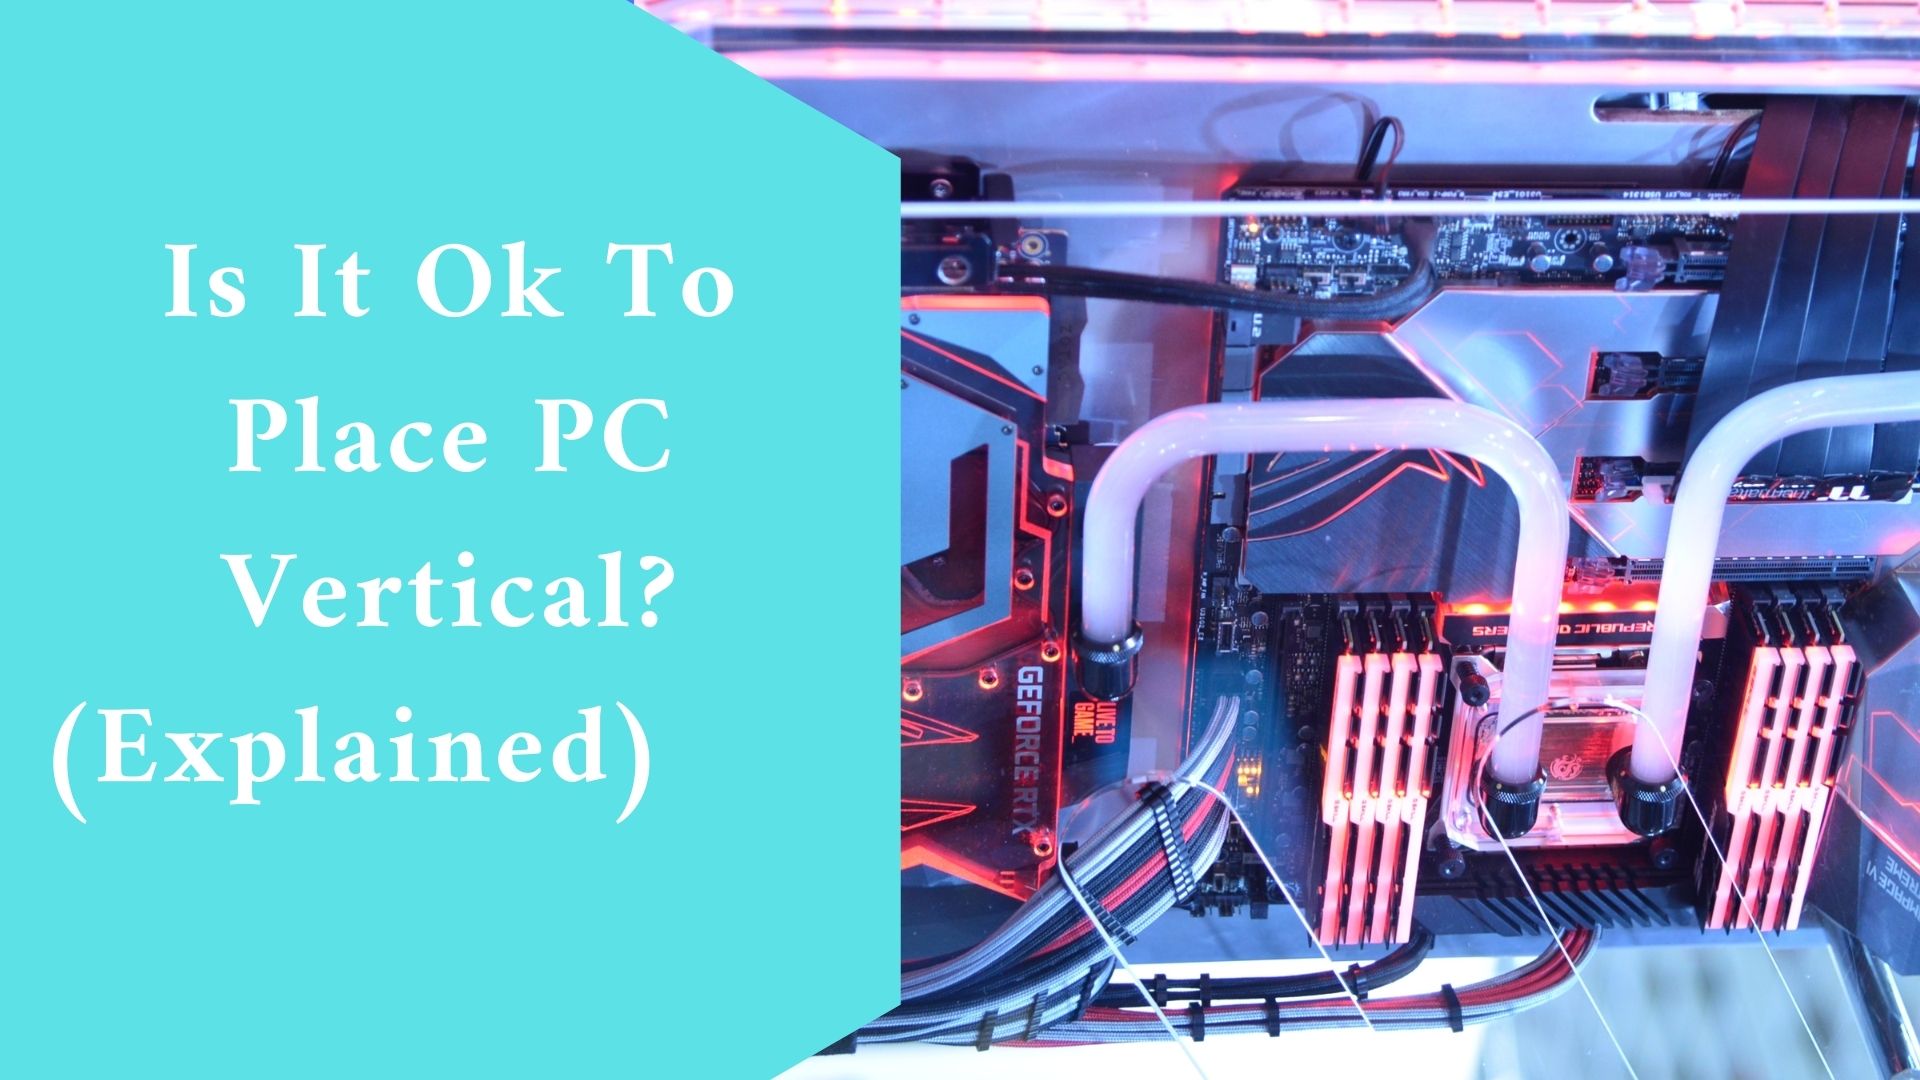 Is It Ok To Place PC Vertical? (Explained)